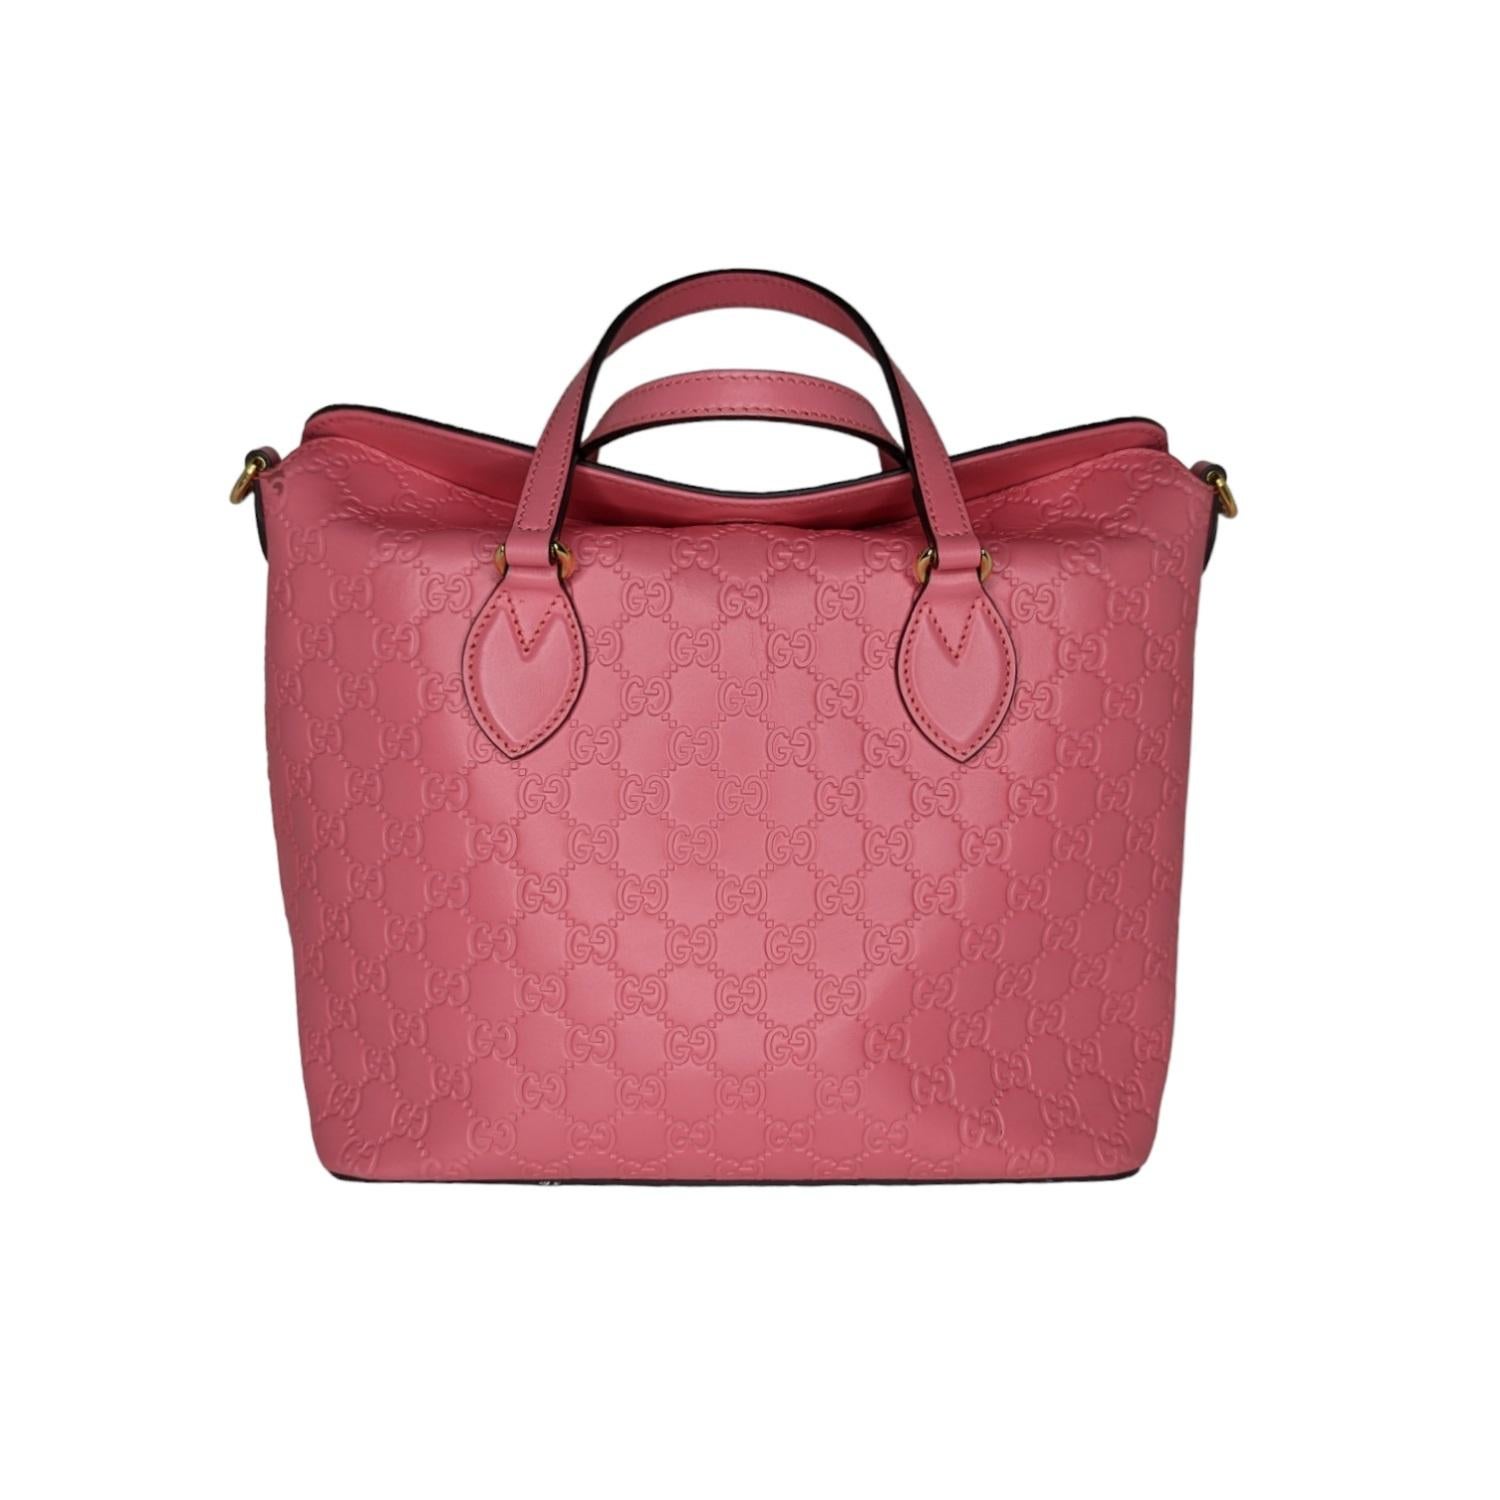 This stylish tote is finely crafted of Guccissima monogram-embossed leather in pink. The tote features thin and sturdy leather strap top handles, and an optional, adjustable shoulder strap with polished gold hardware. The top opens to a blush beige